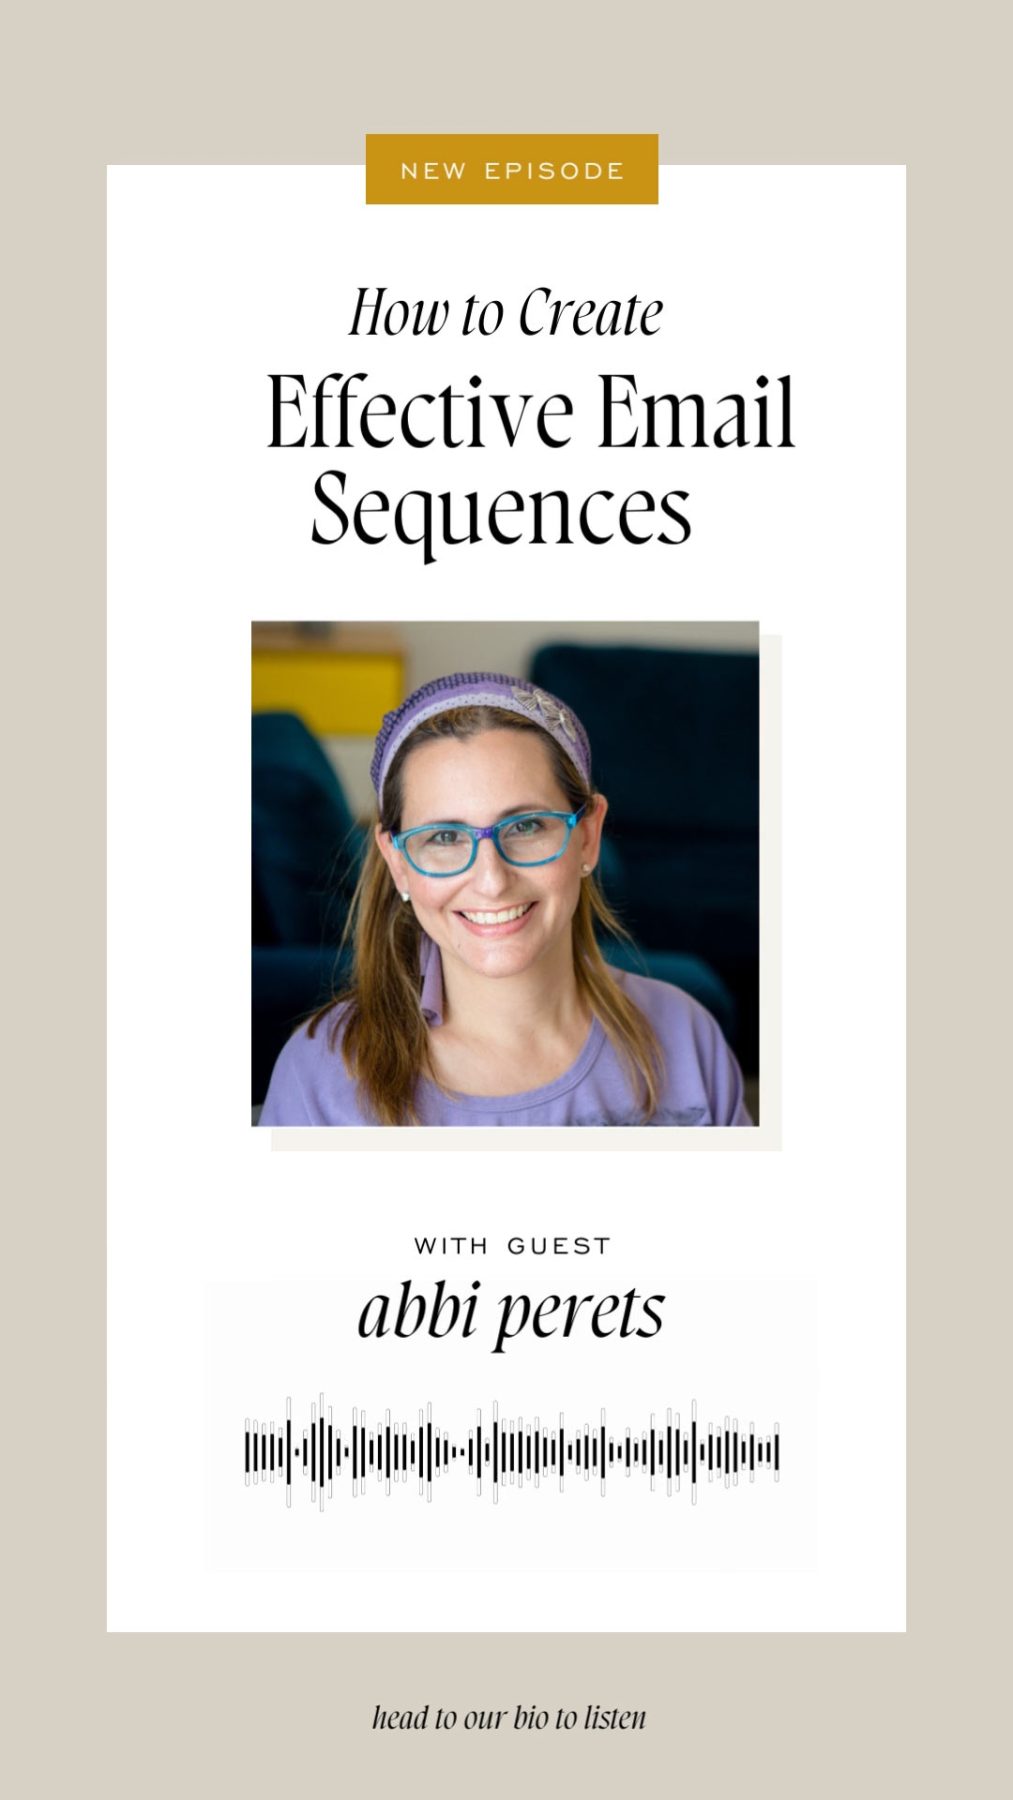 How to Create Effective Email Sequences